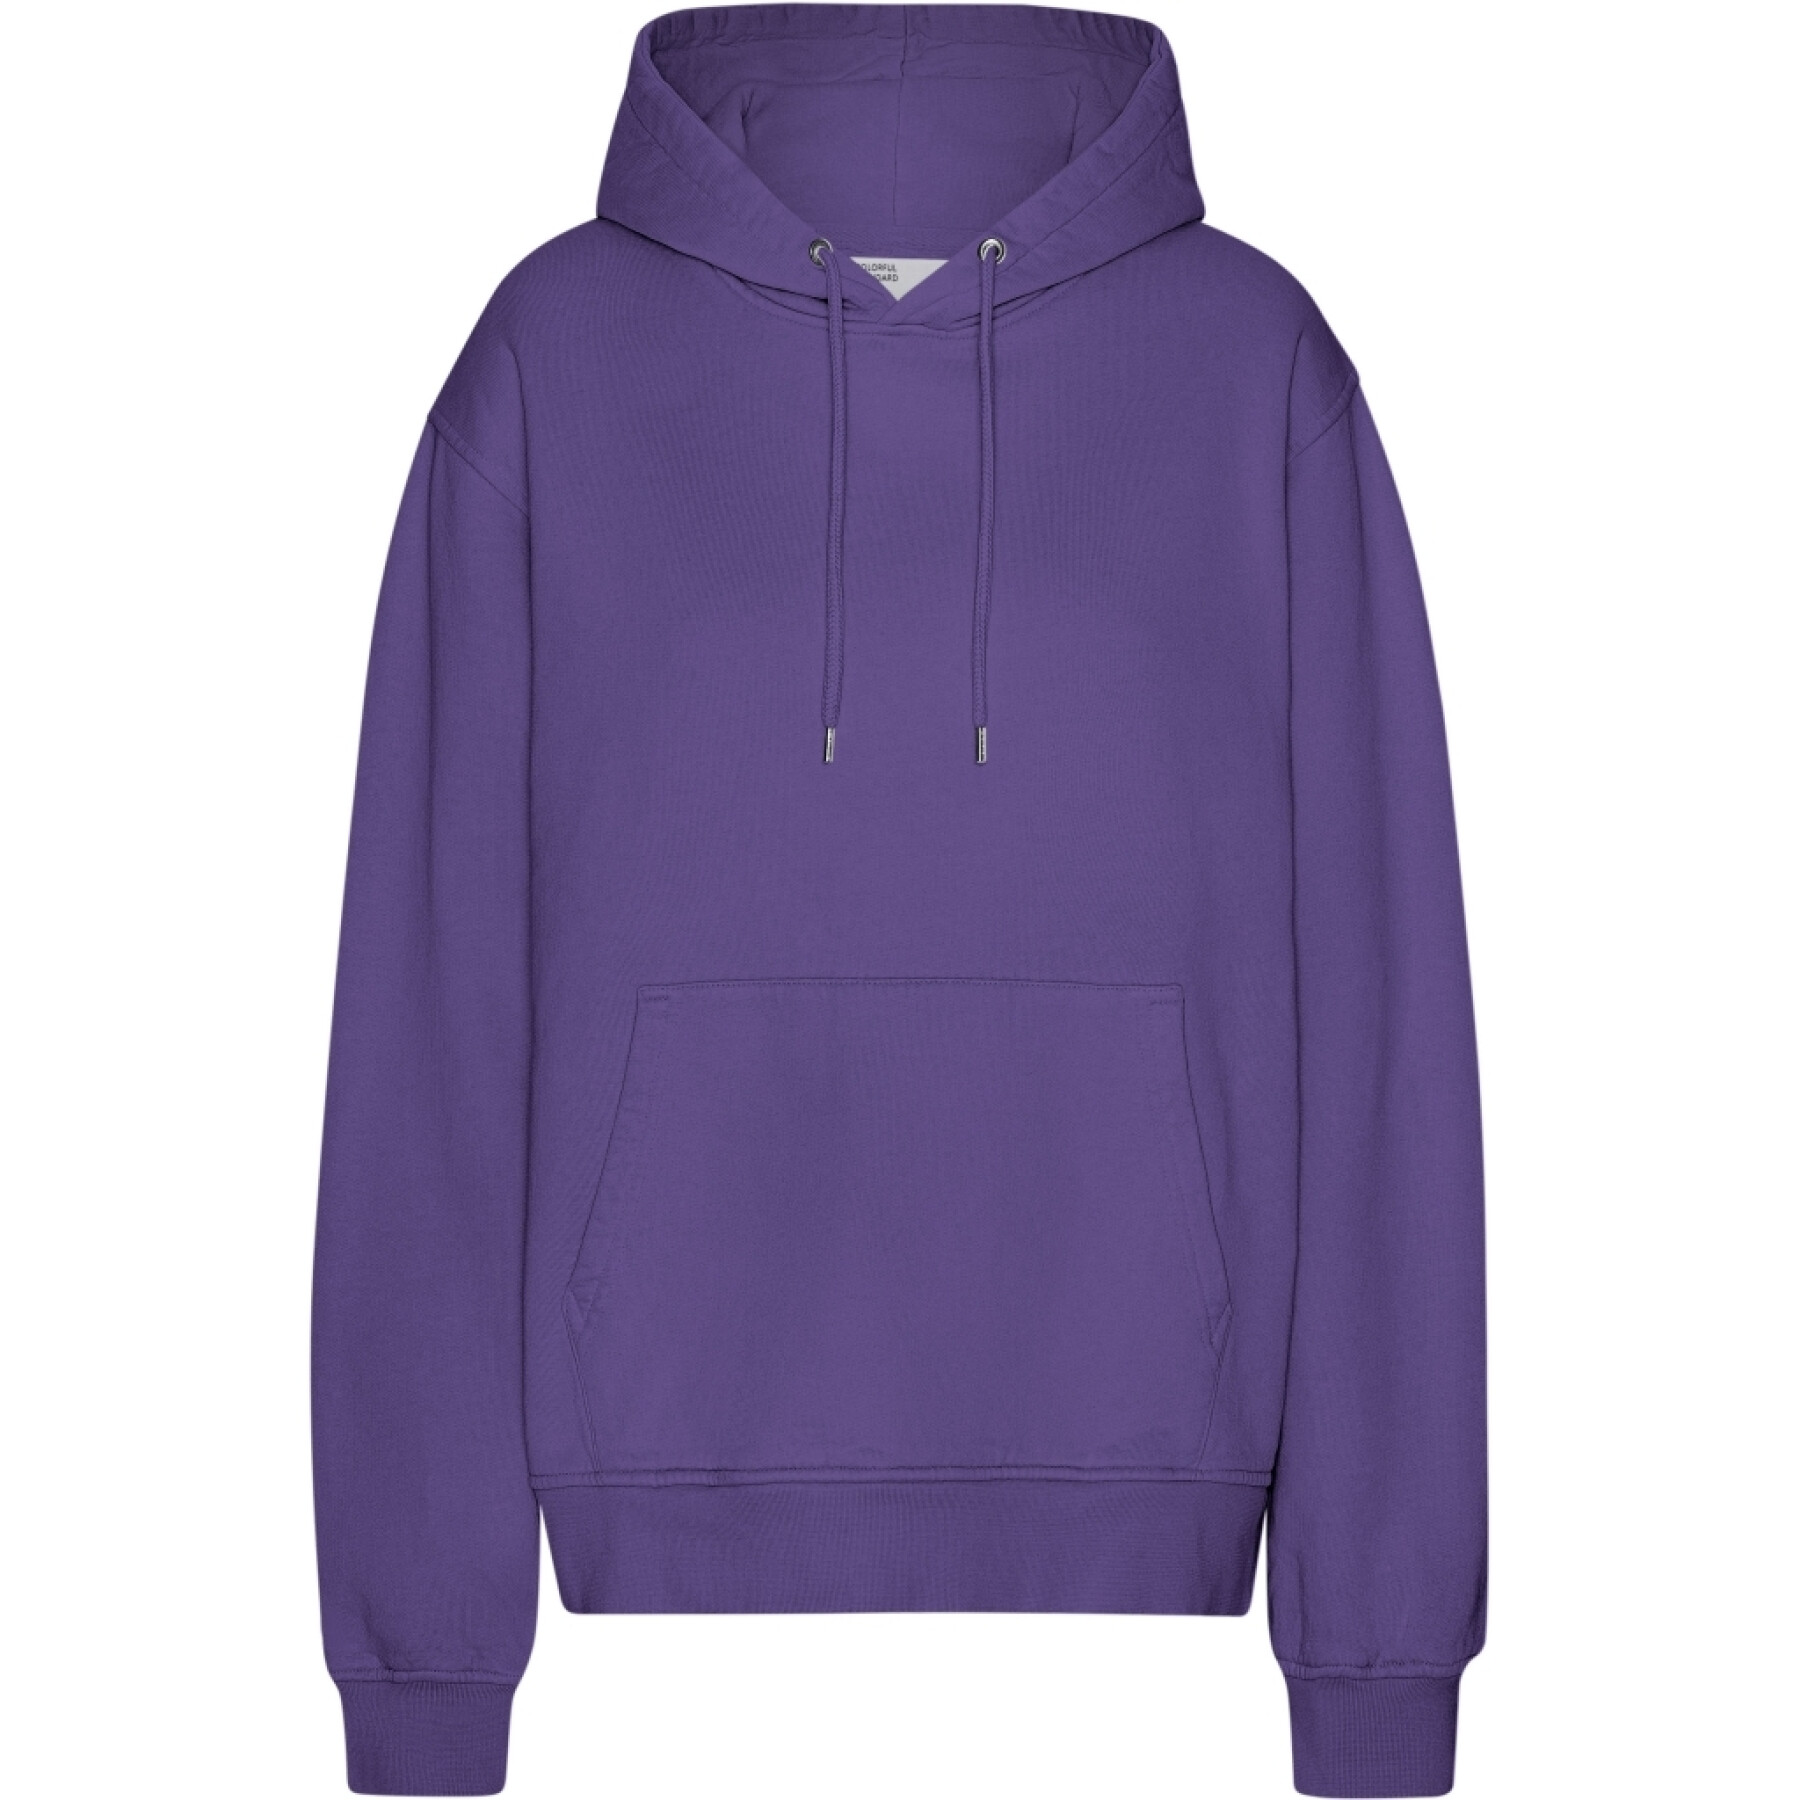 Hoodie Colorful Standard Classic Organic Ultra Violet